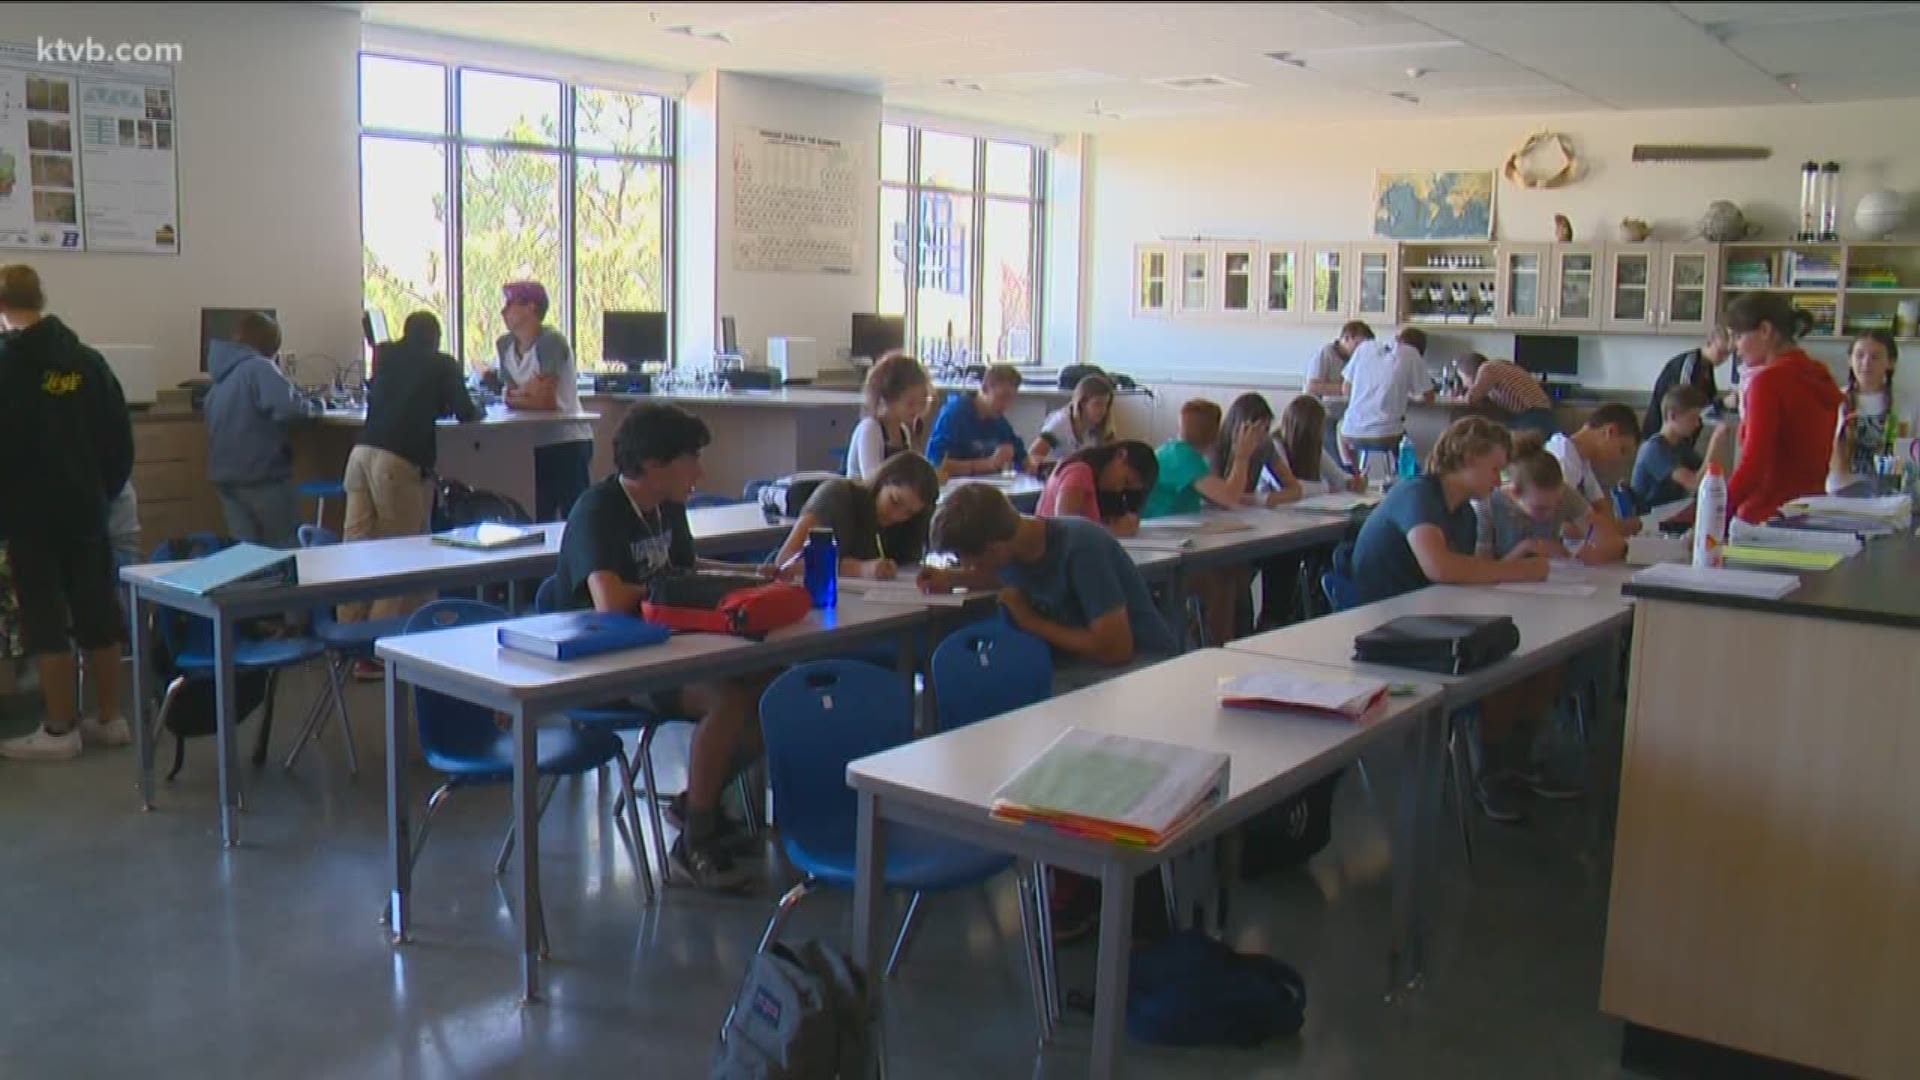 The school's principal says those new classrooms are already full.